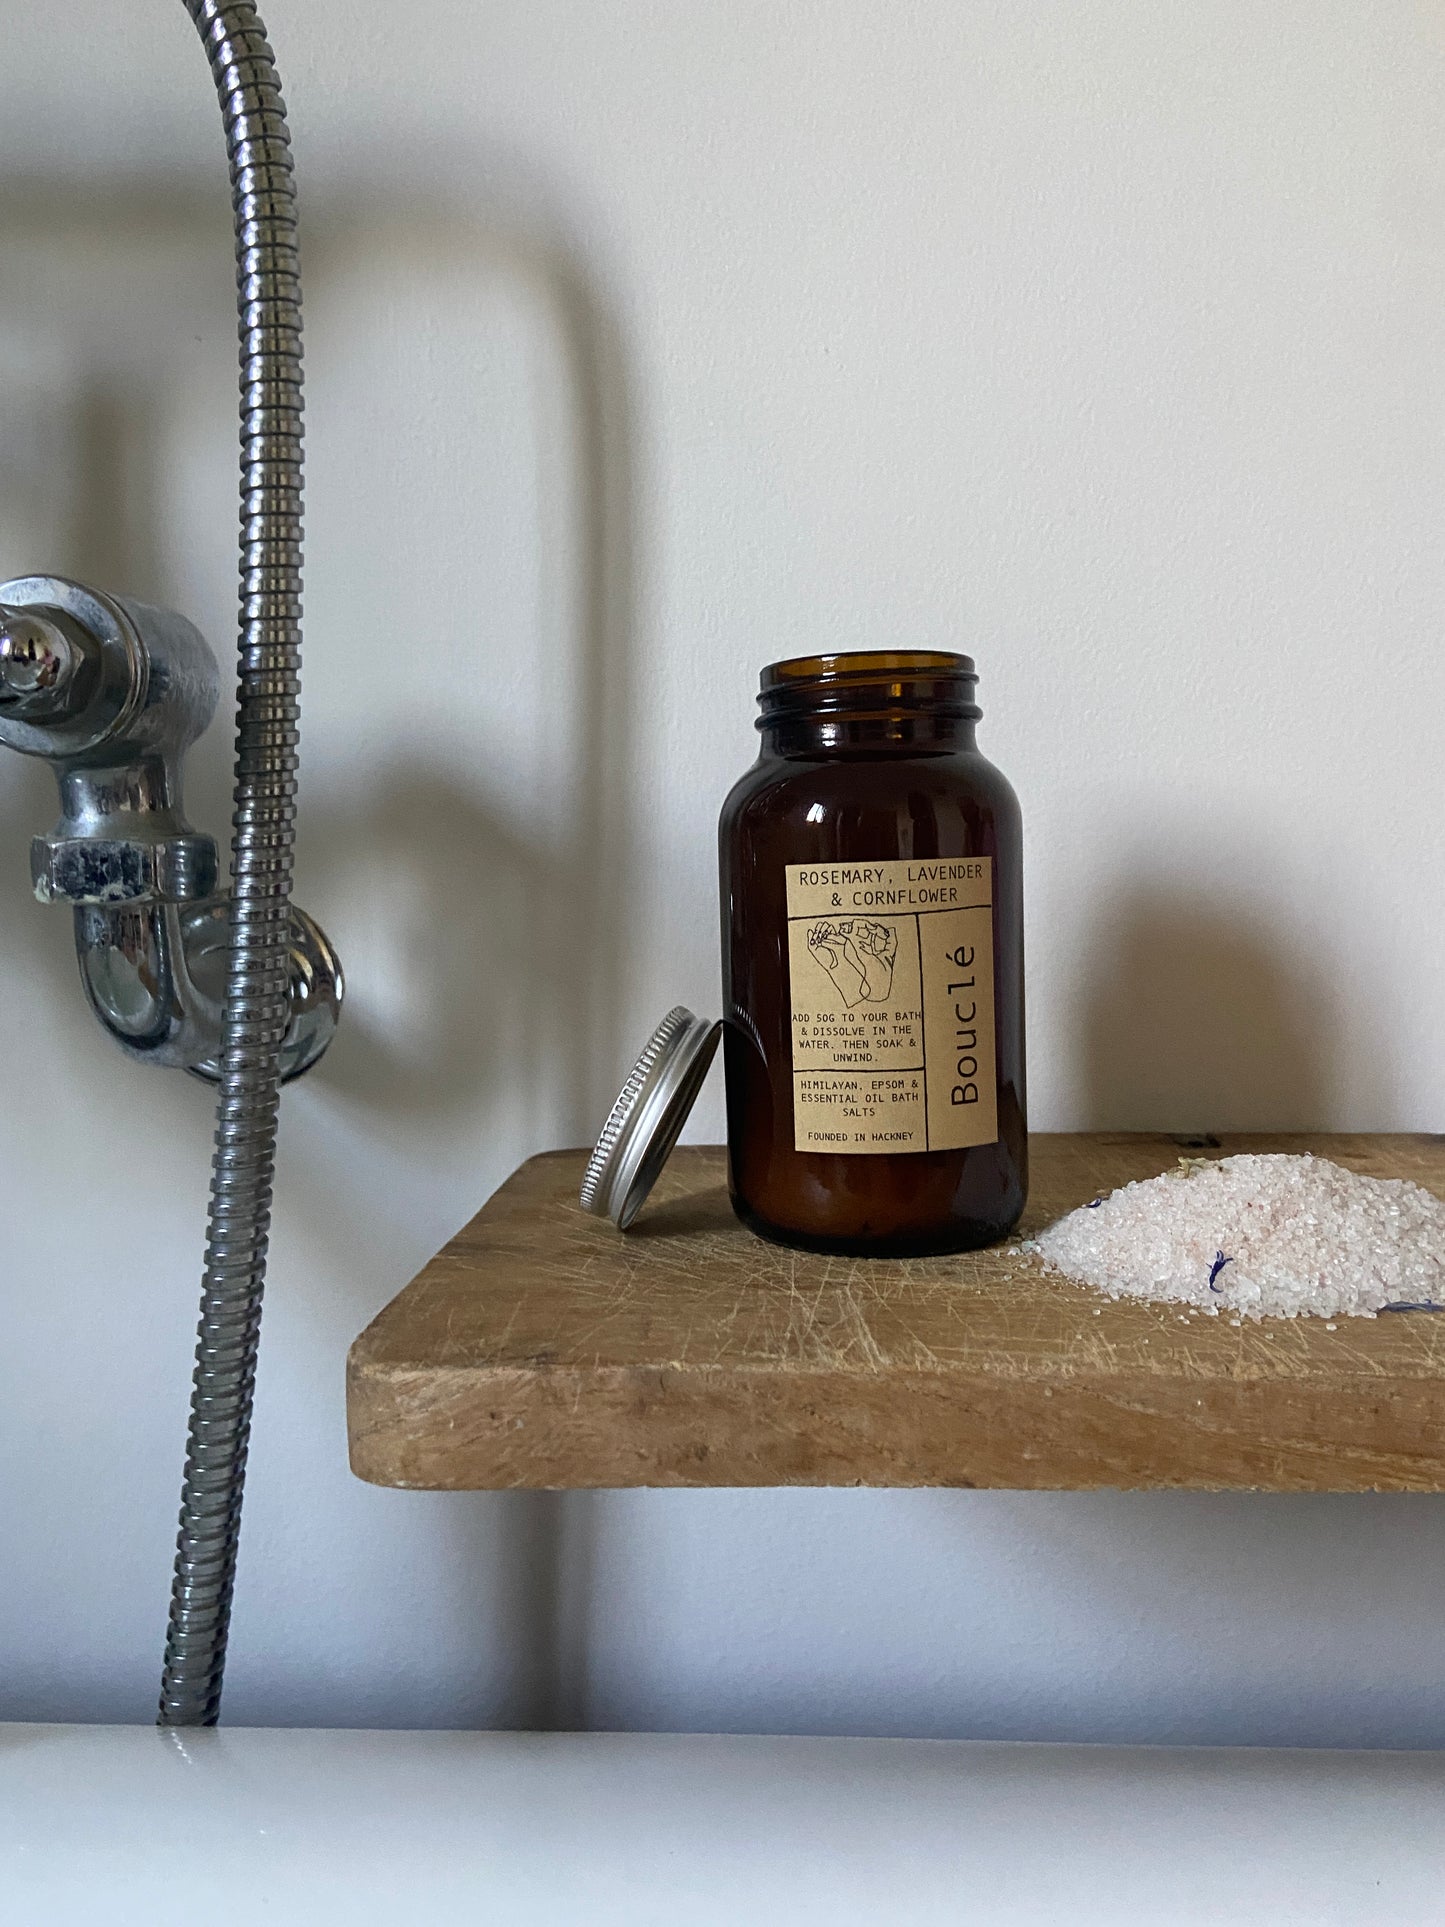 Rosemary, Lavender & Cornflower mineral rich bath salts on wooden board beside the bath. Made by Bouclé in East London & Brighton